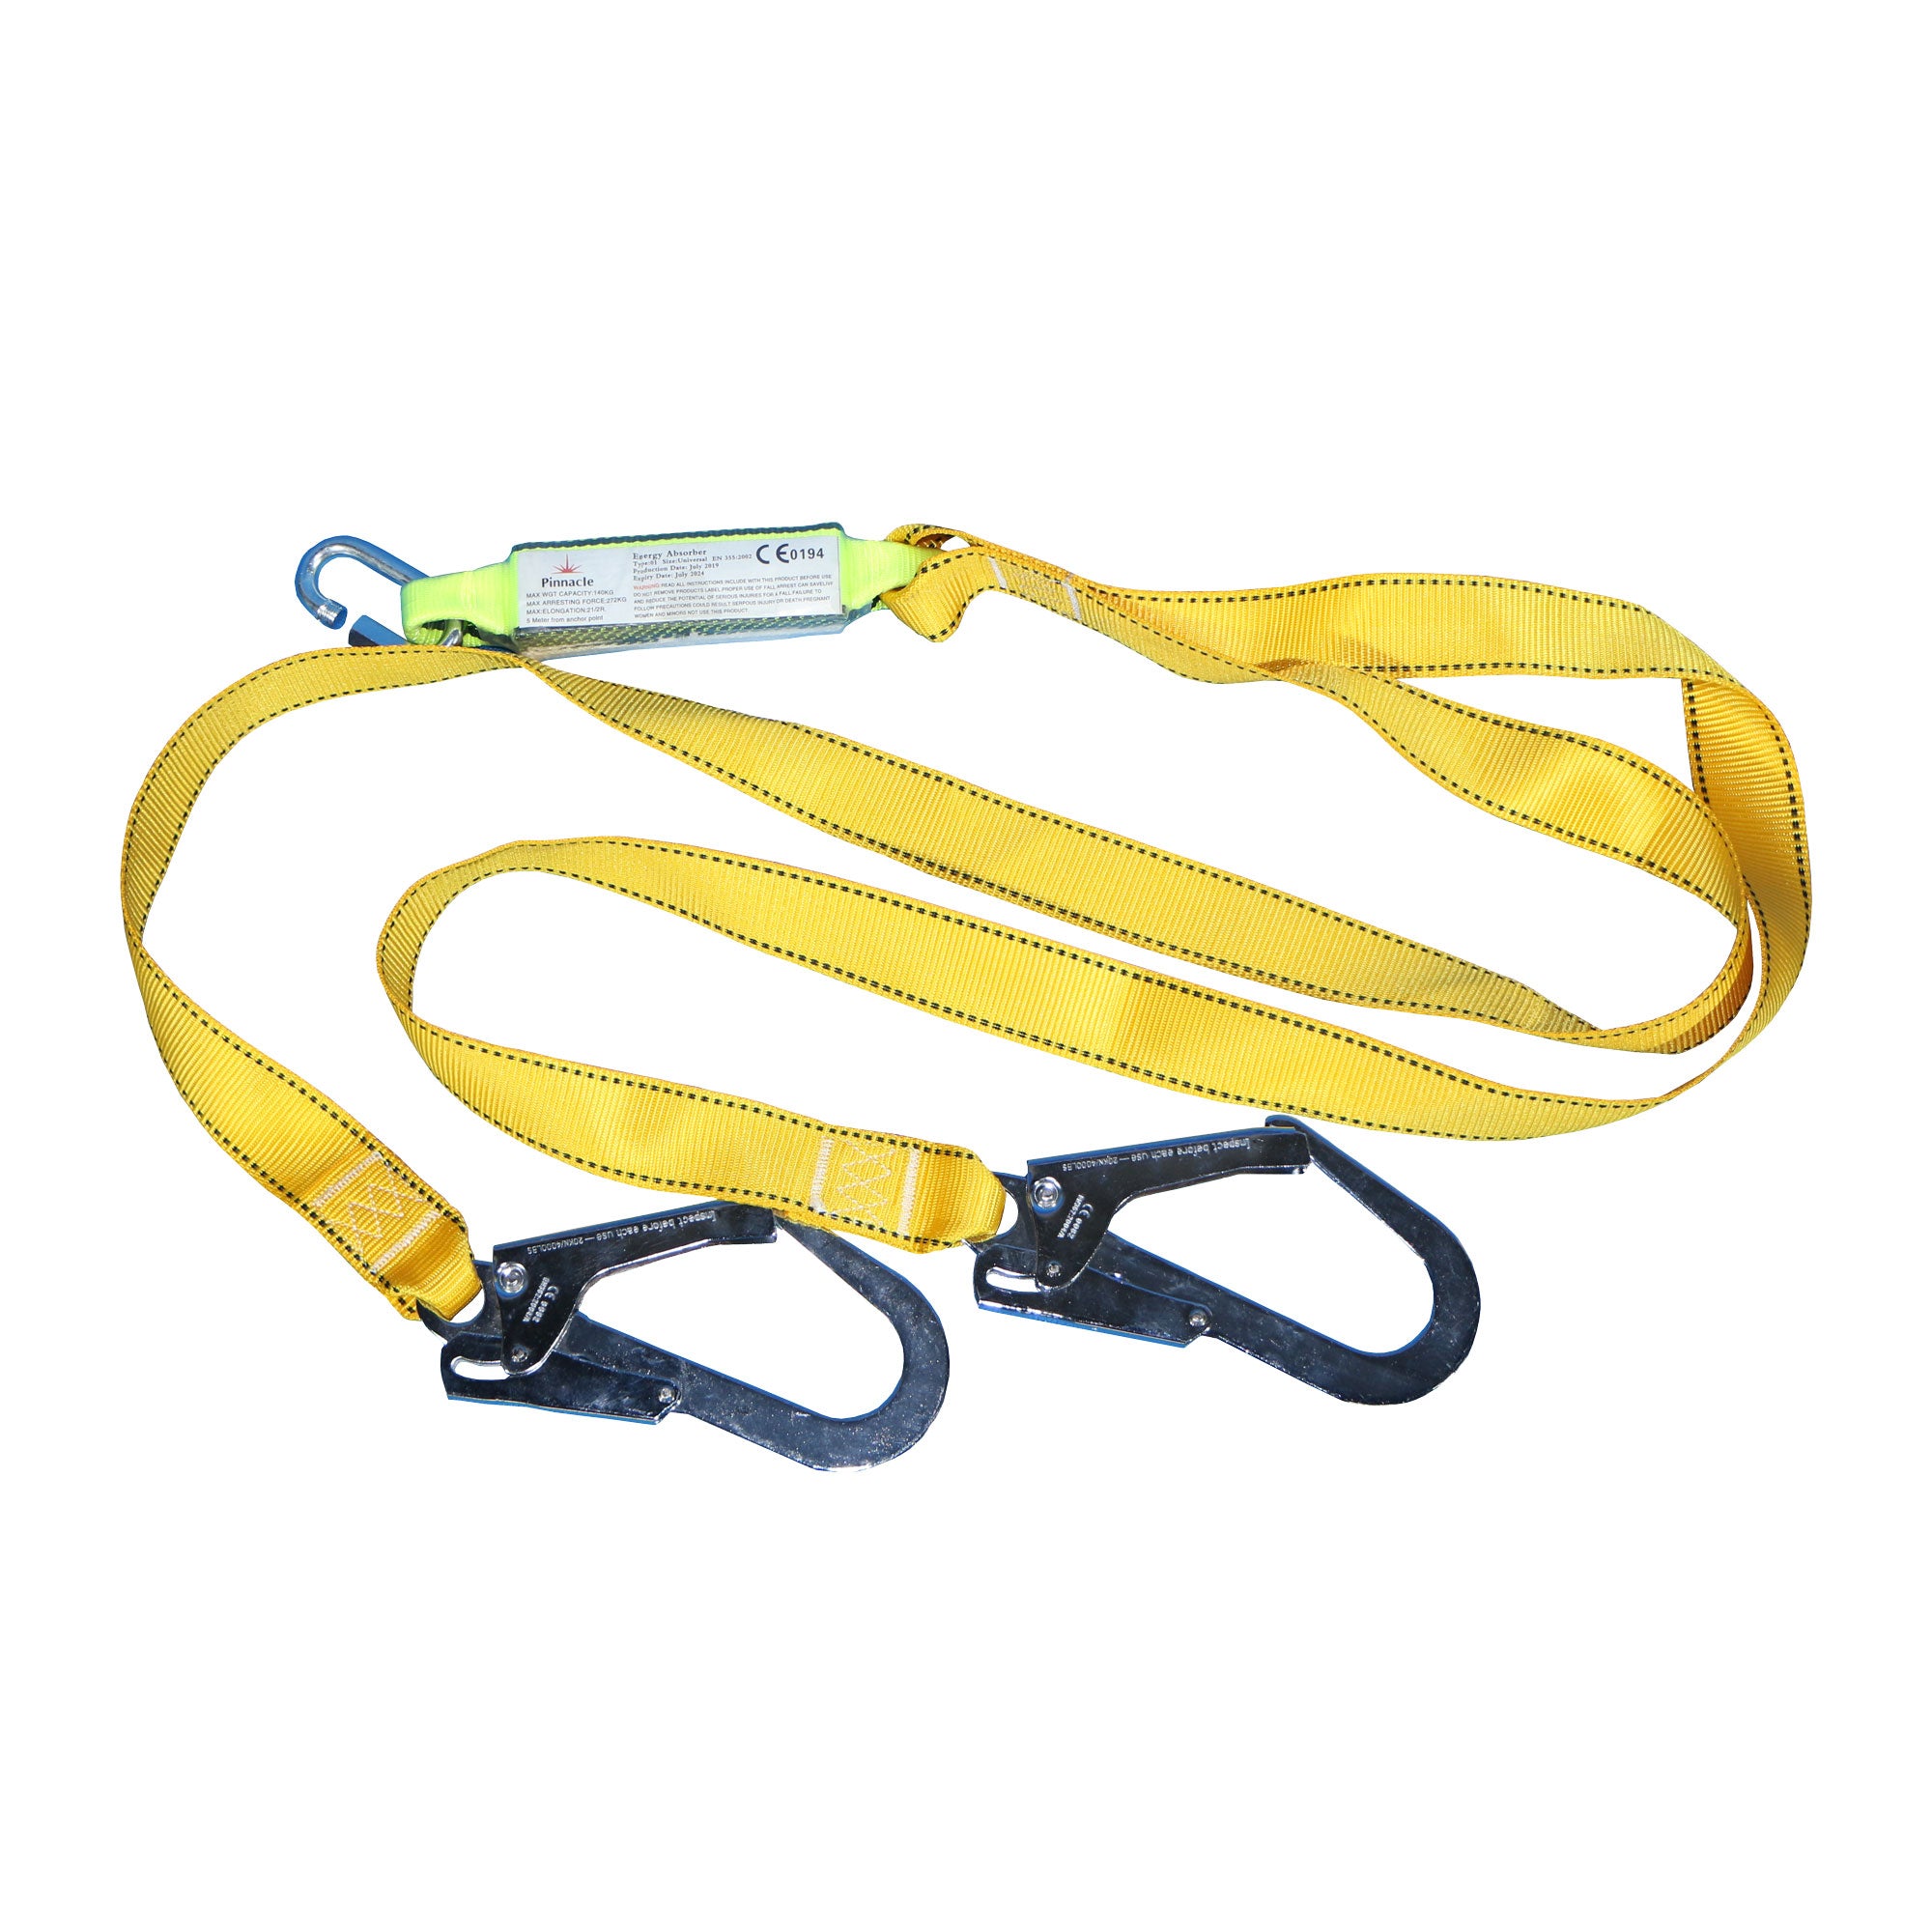 Double lanyard with Shock Absorber & Scaffold Hook